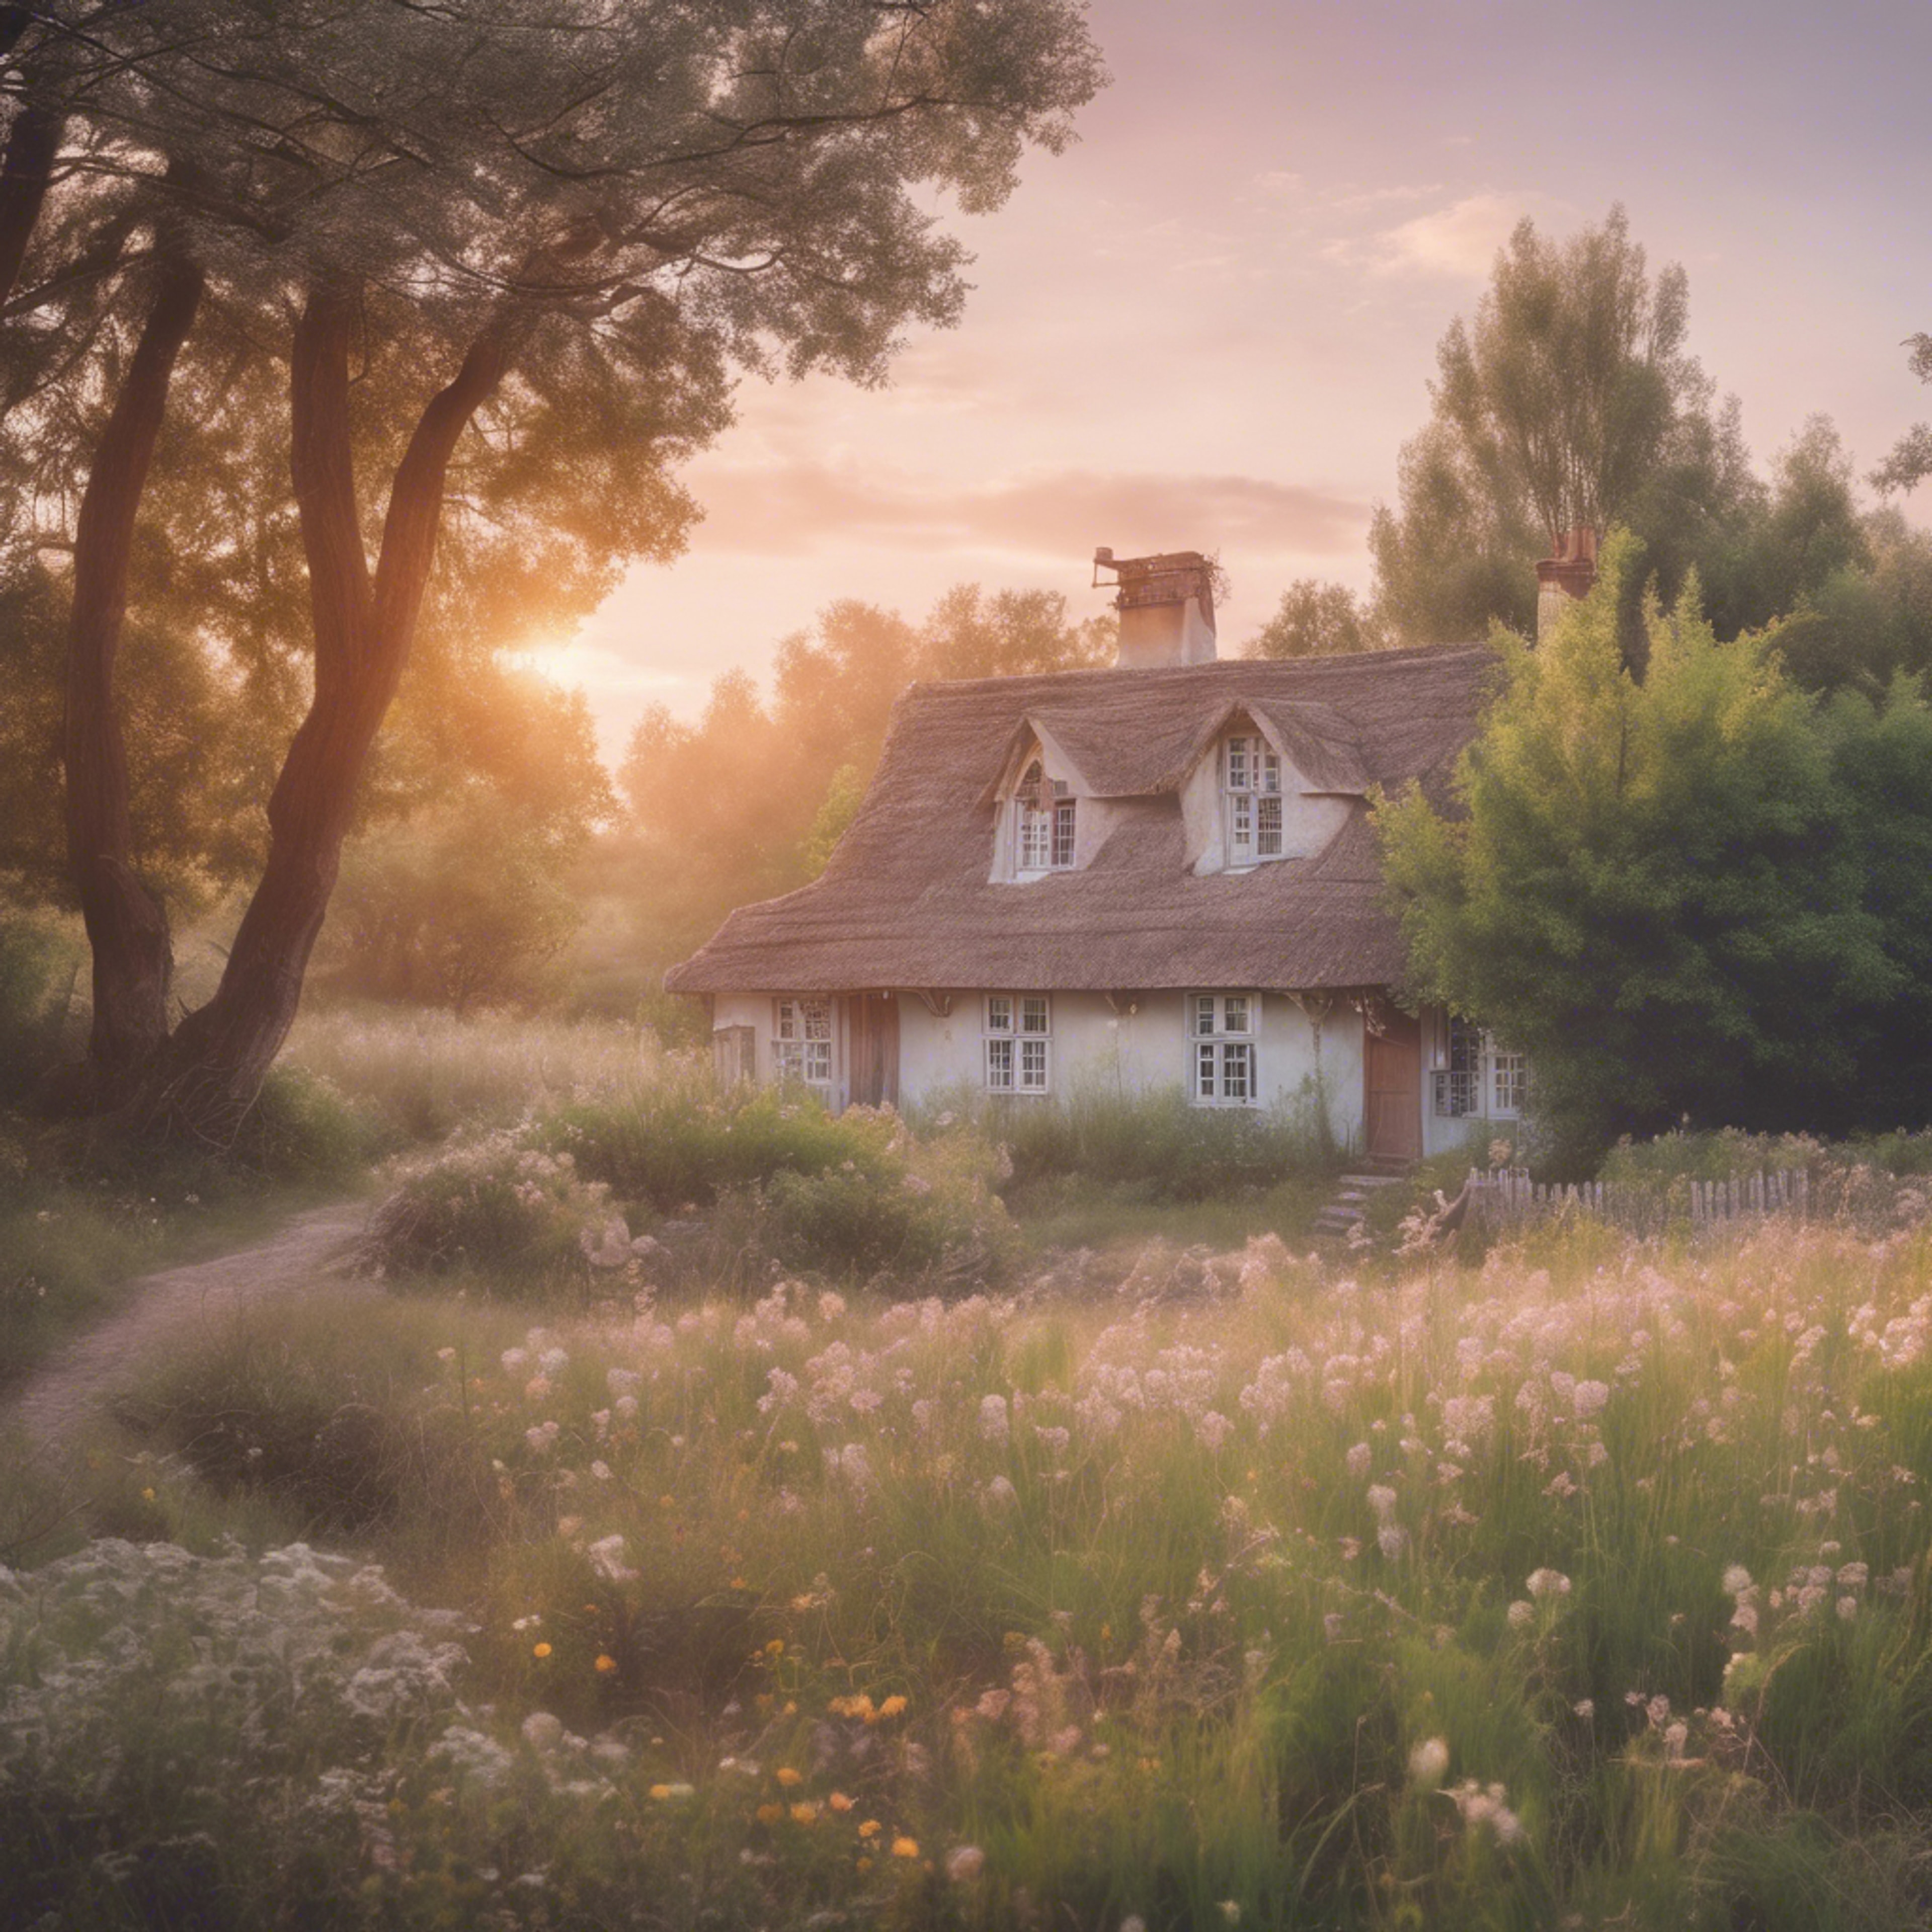 A soft pastel sunrise over rustic cottages, birthing ethereal aesthetic beauty壁紙[daea3b7a39e14a169eb1]